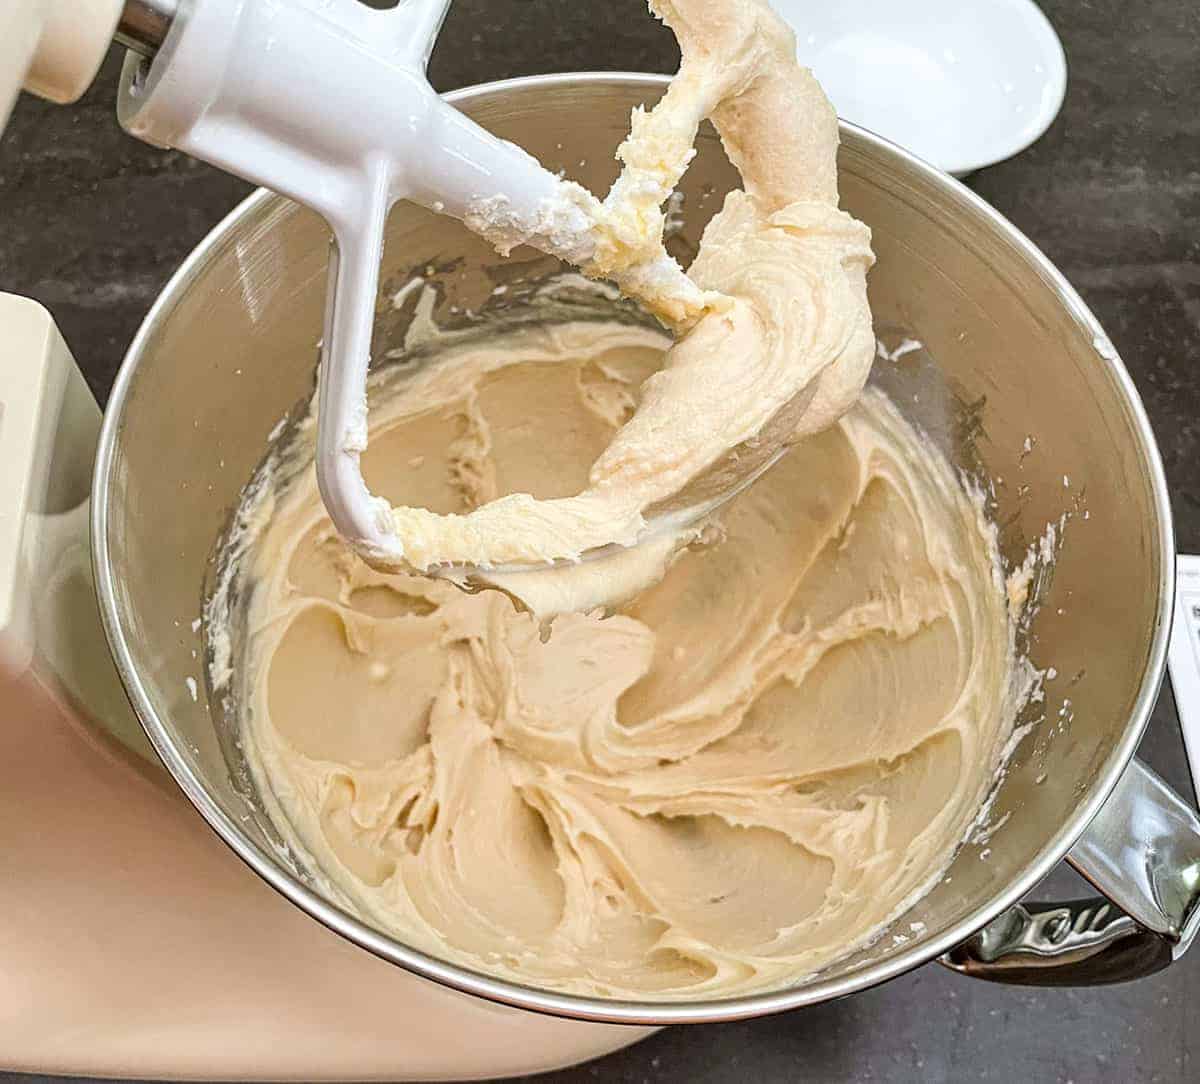 Mixed butter, cream cheese and sugar into a smooth batter.